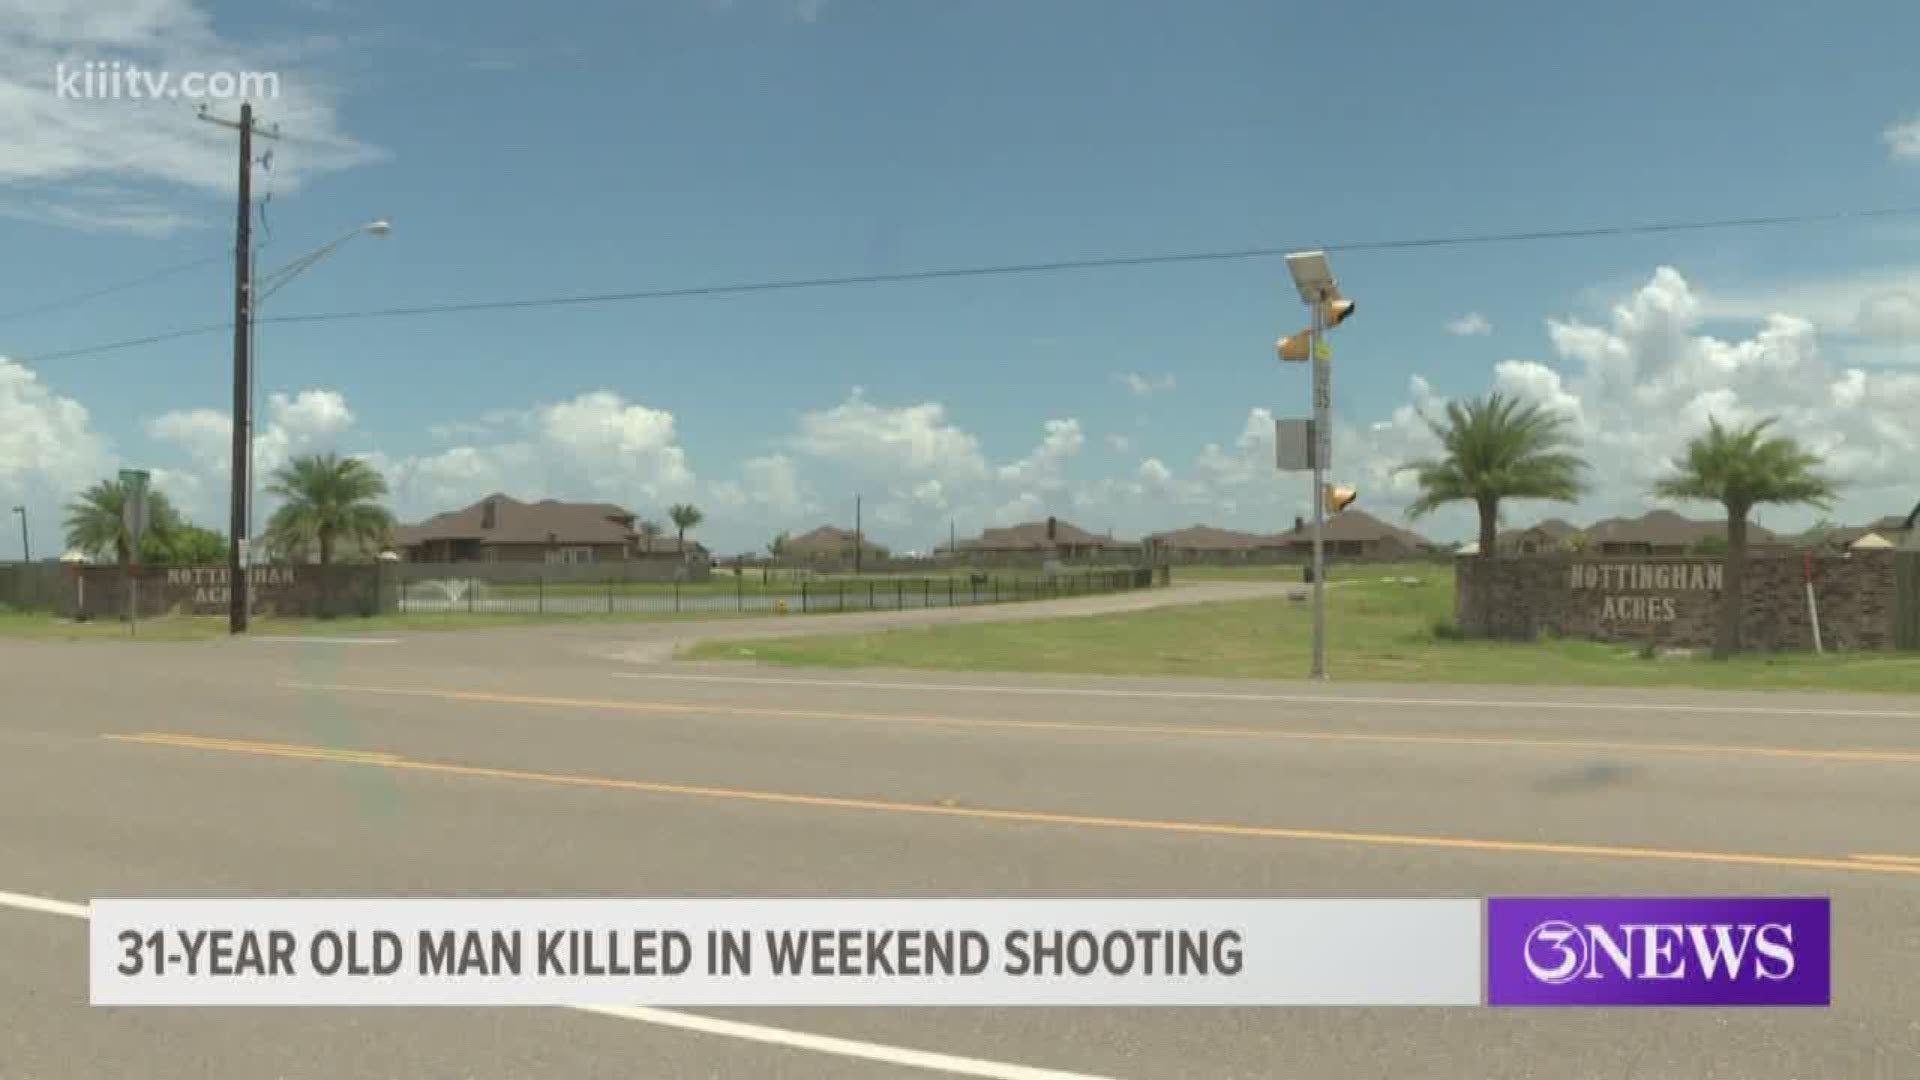 Because the shooting took place outside Corpus Christi city limits, the Nueces County Sheriff's Office is reportedly handling the investigation.